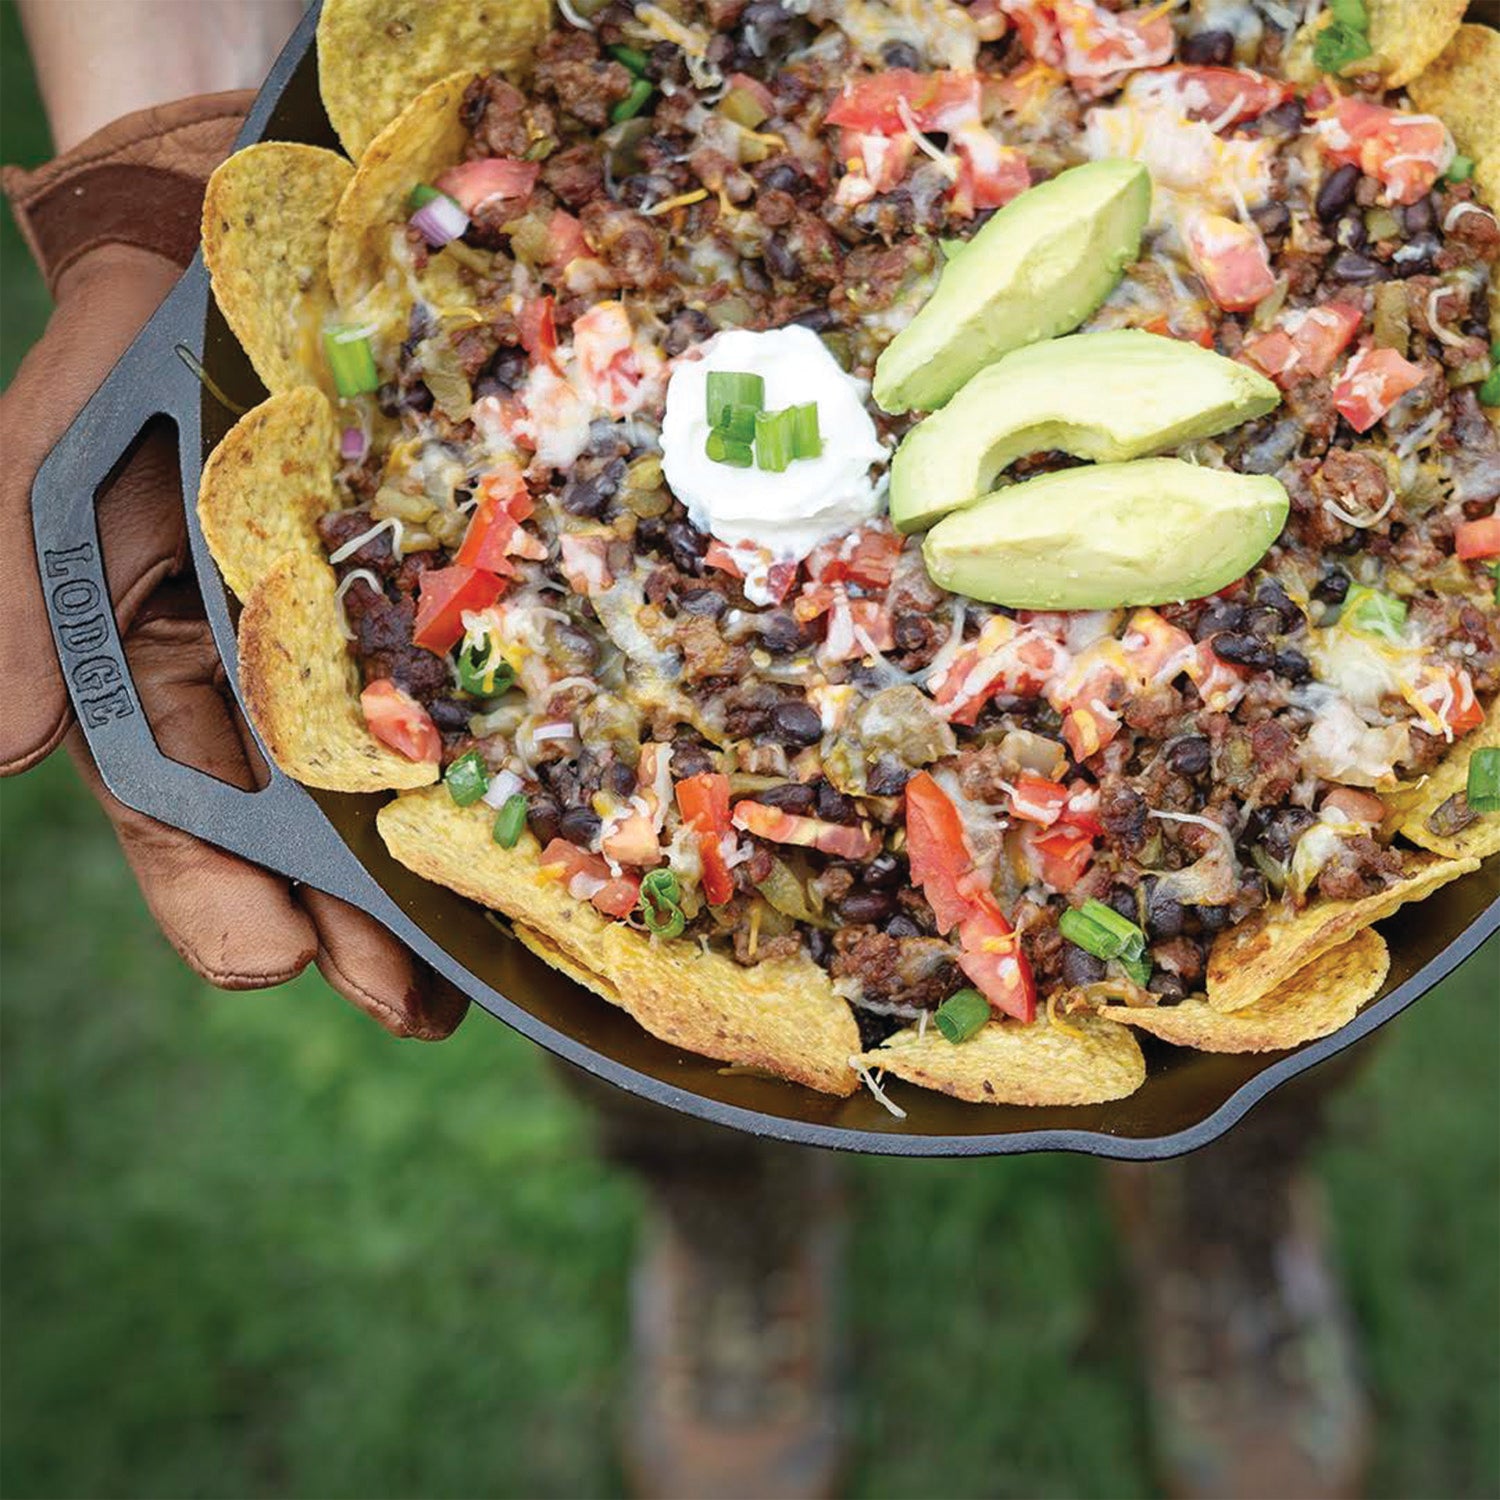 A person holding a skillet filled with a Organic Ground Beef taco salad topped with three Avocado slices and a scoop of sour cream surrounded by a ring of circle chips.